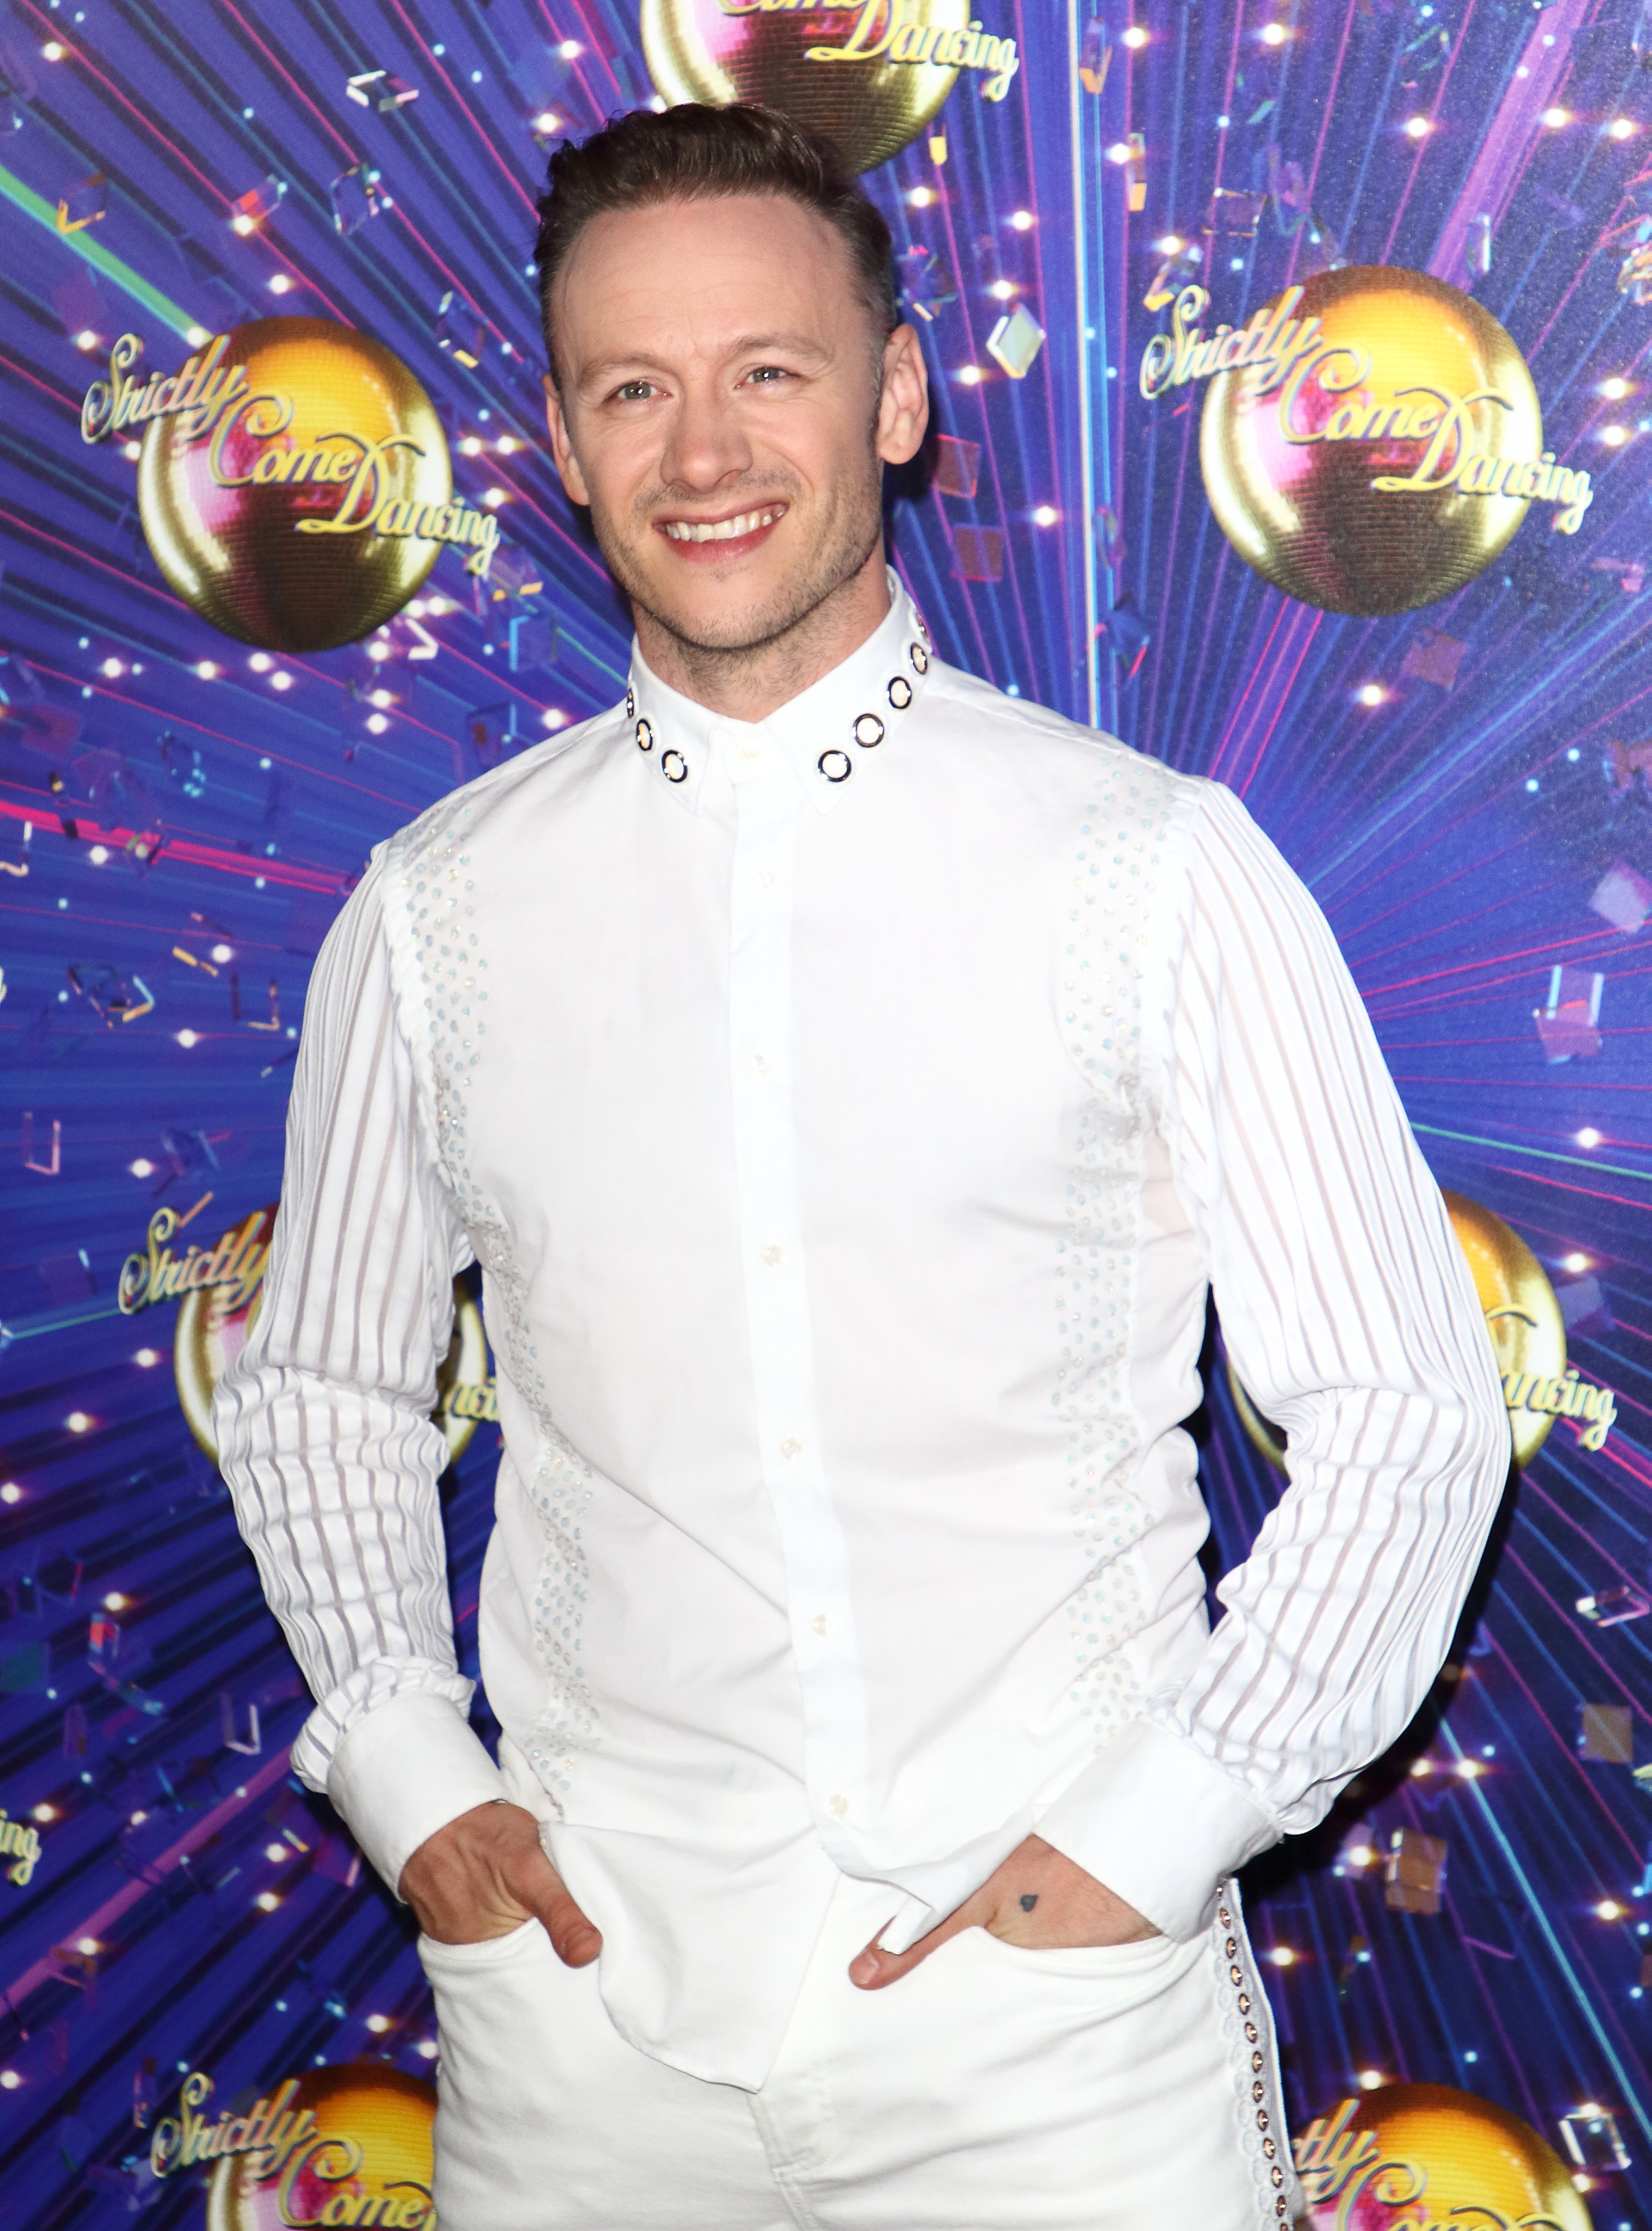 LONDON, UNITED KINGDOM - 2019/08/26: Kevin Clifton at the Strictly Come Dancing Launch at BBC Broadcasting House in London. (Photo by Keith Mayhew/SOPA Images/LightRocket via Getty Images)